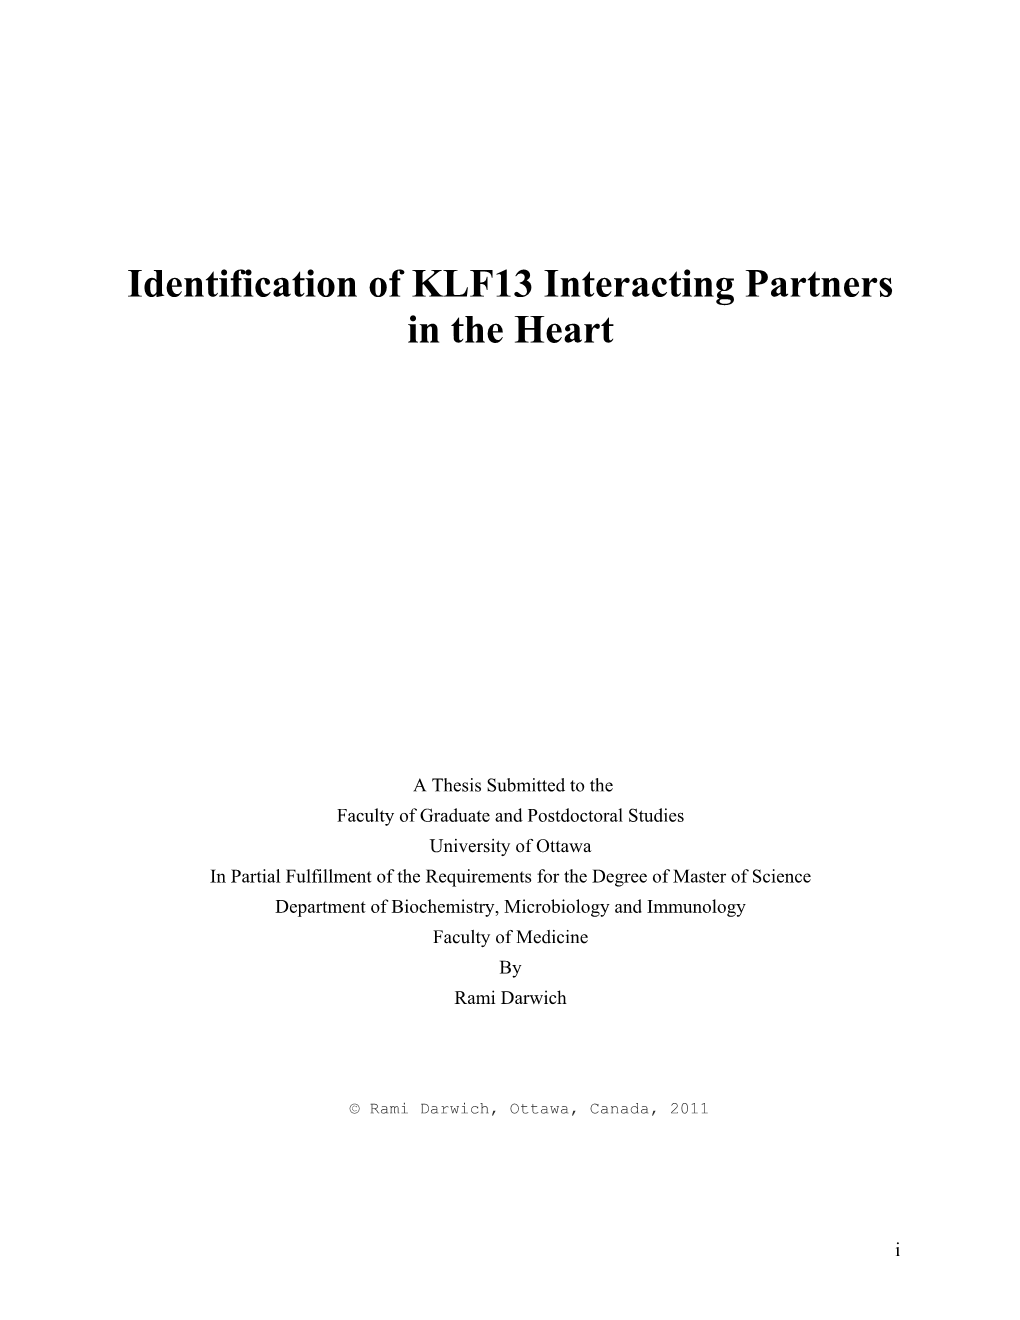 Identification of KLF13 Interacting Partners in the Heart